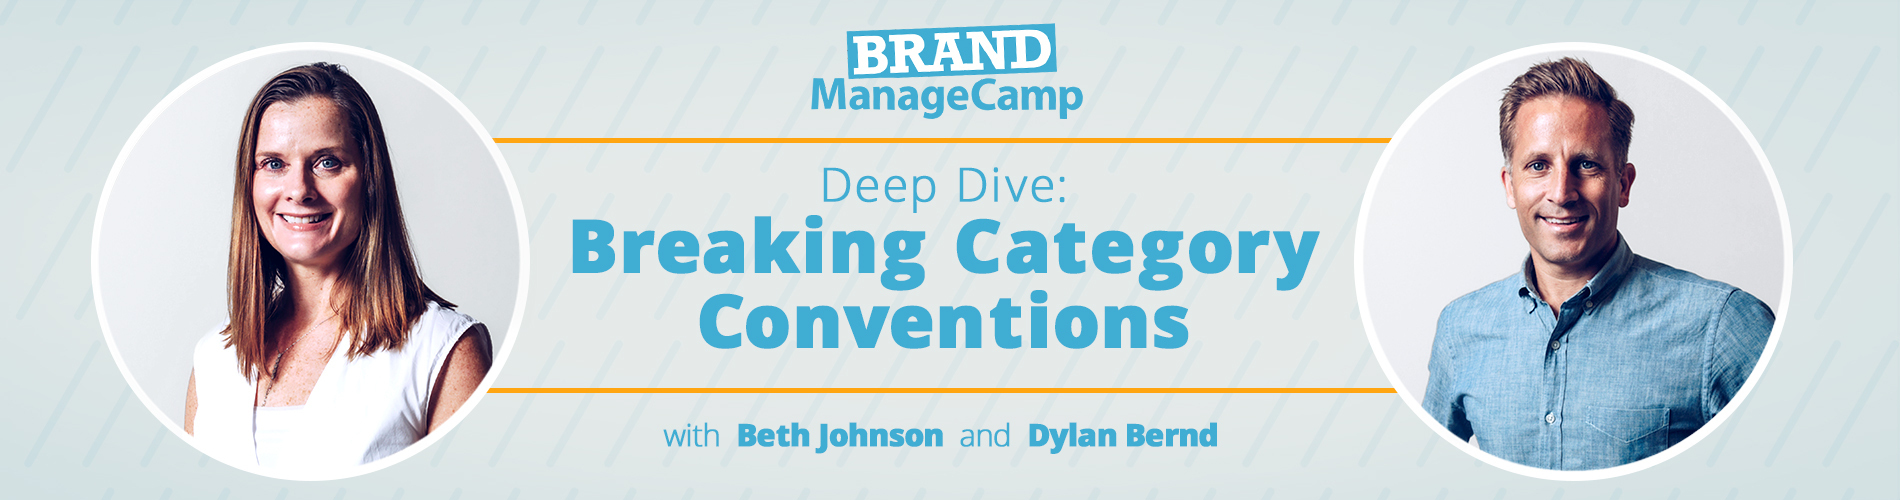 RP3 Dives Deep into Breaking Category Conventions